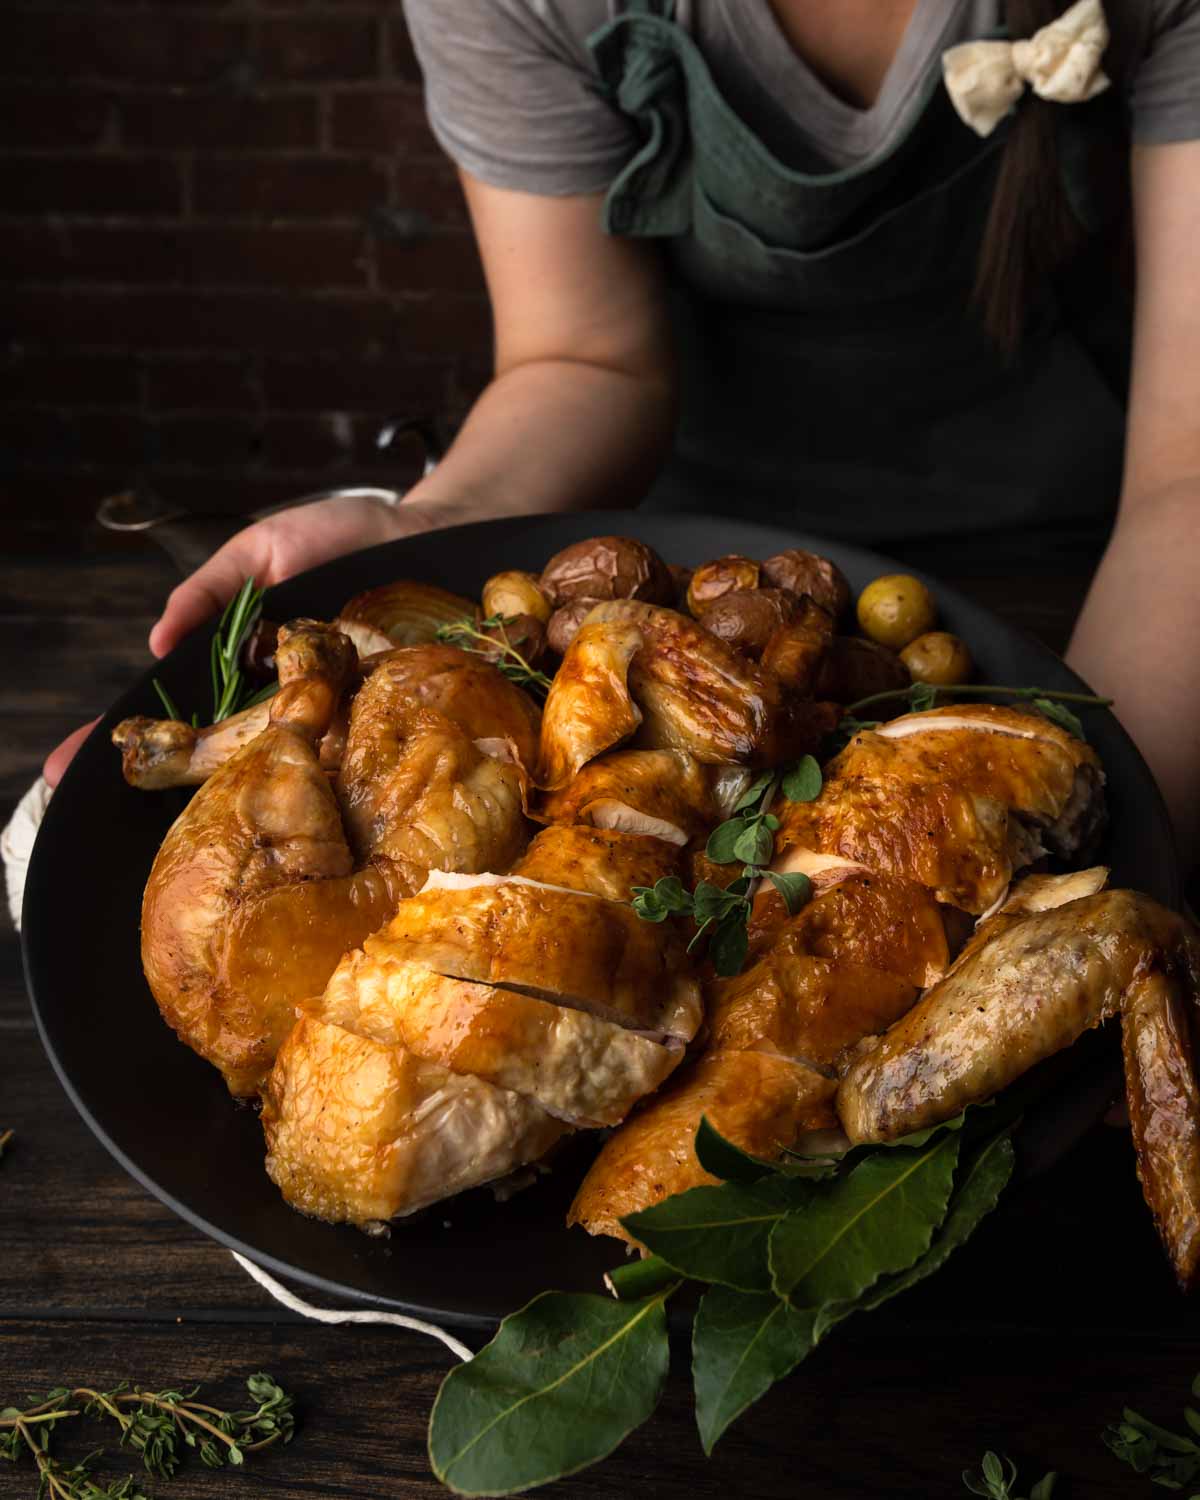 A woman holding a platter of carved roast chicken and baby potatoes